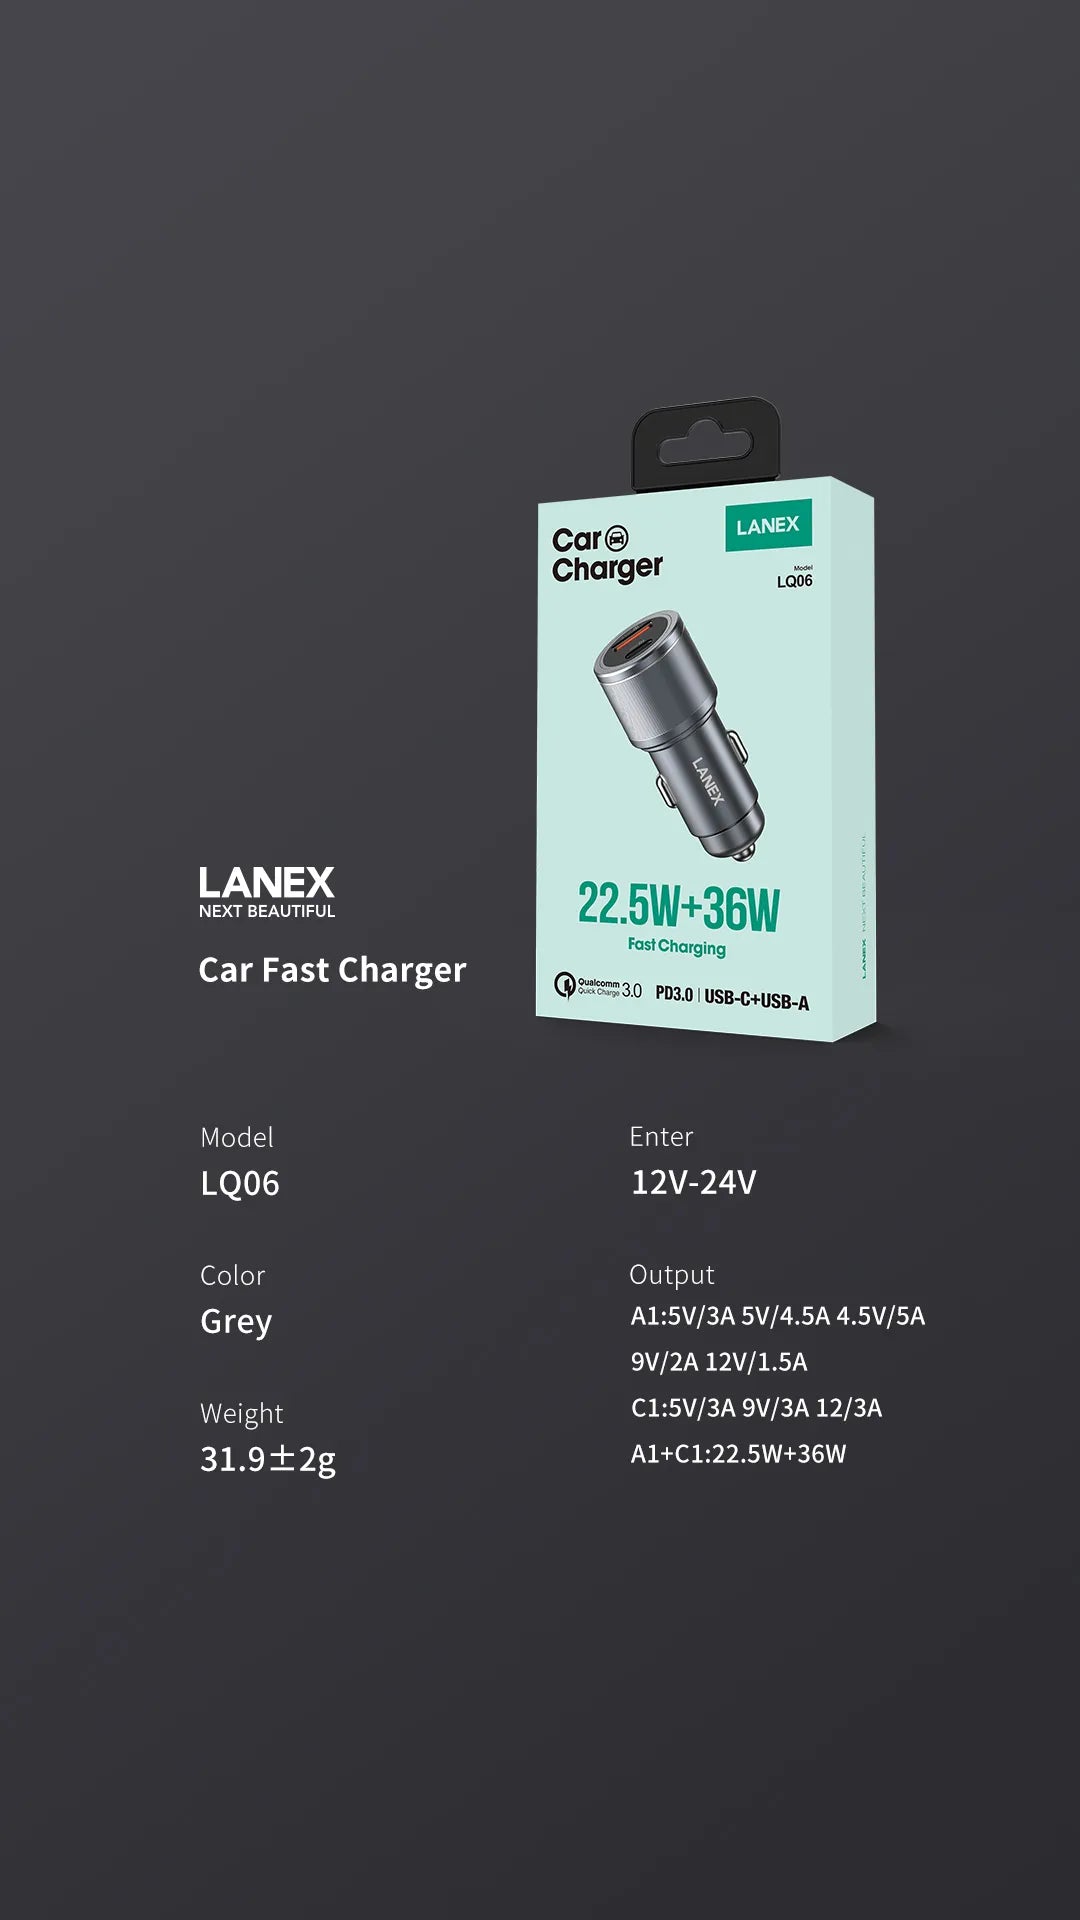 Lanex Car Charger 22.5+36W Fast Charger LQ06